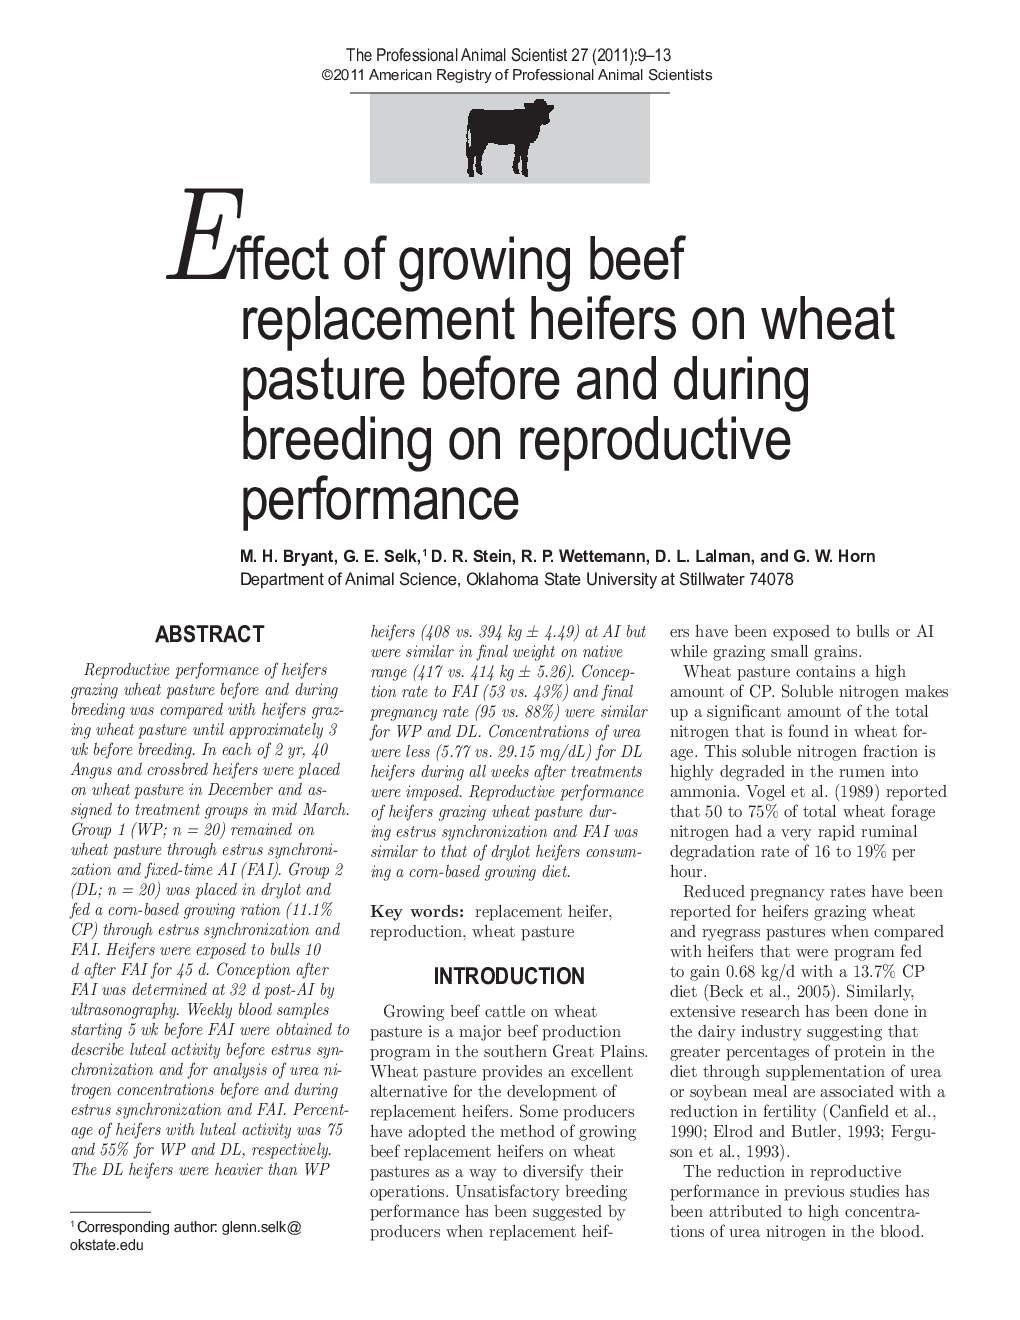 Effect of growing beef replacement heifers on wheat pasture before and during breeding on reproductive performance